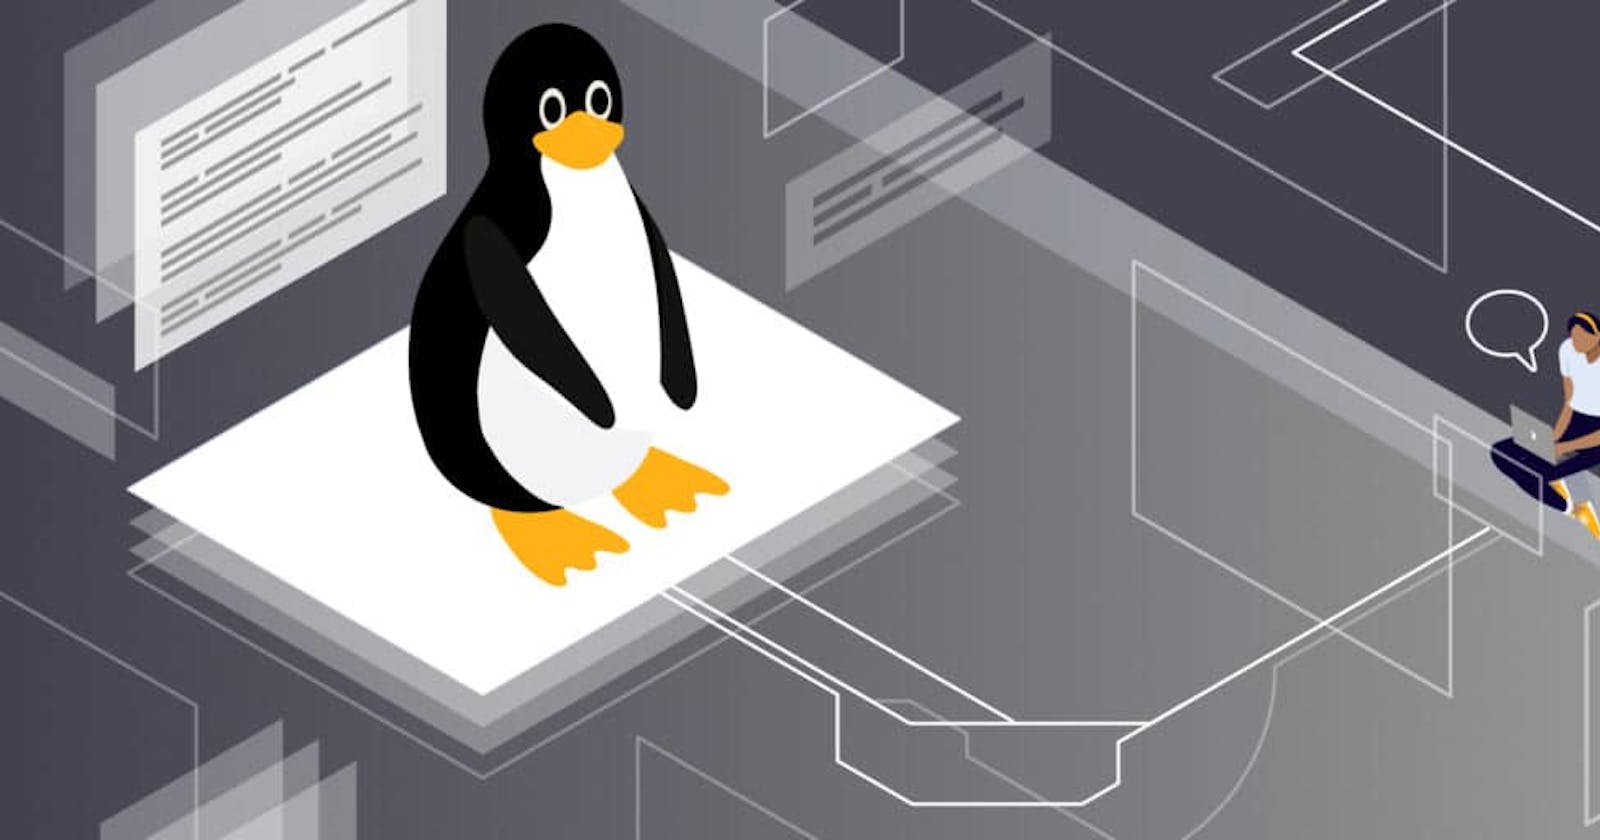 Let's learn about the Linux OS